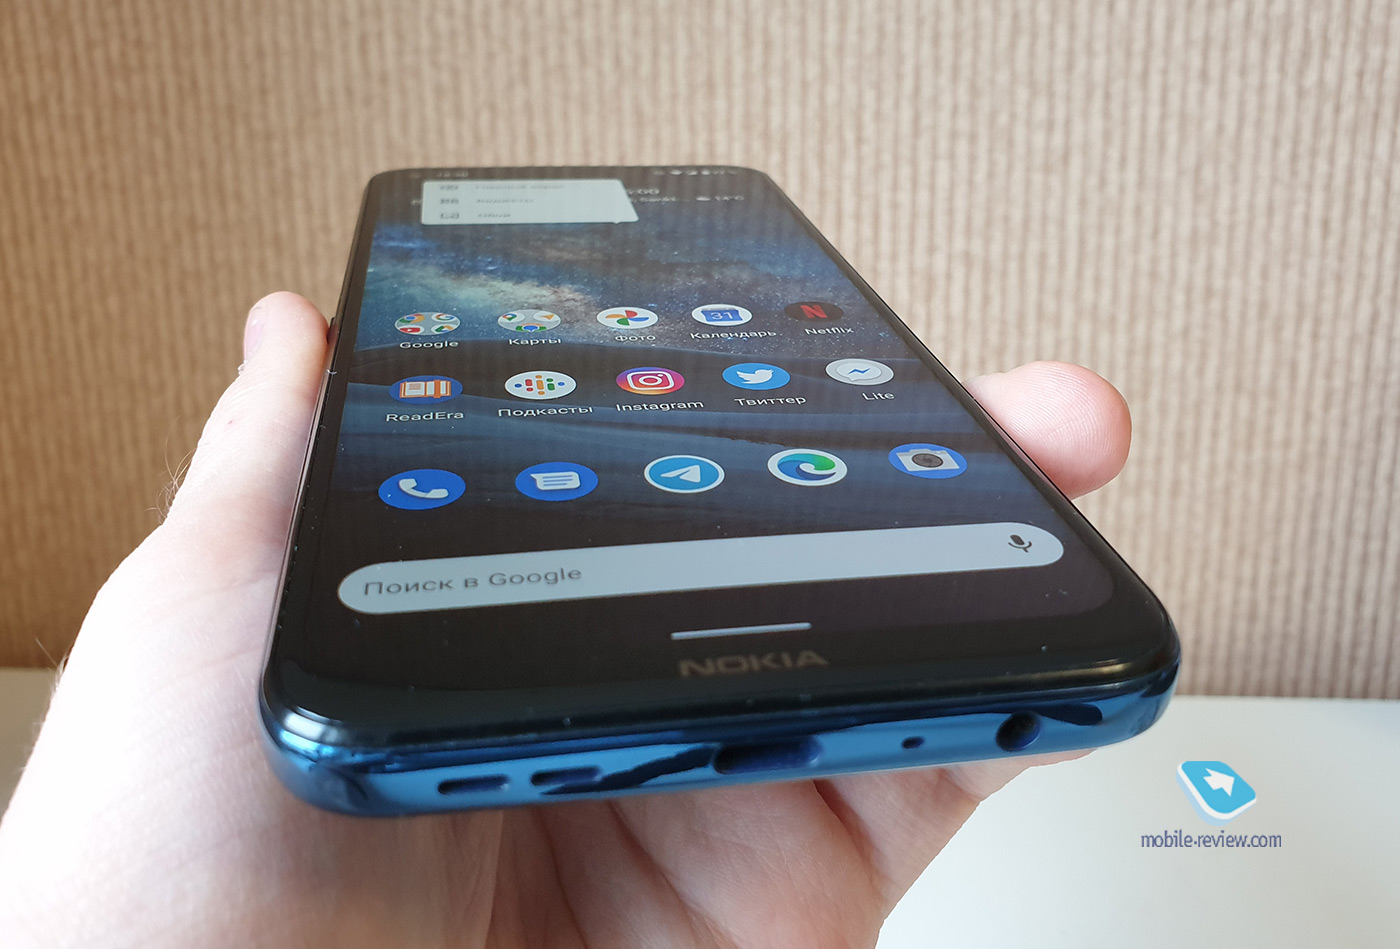 Review of Nokia 8.3 5G. Perhaps the most successful smartphone from Nokia, but not without compromises